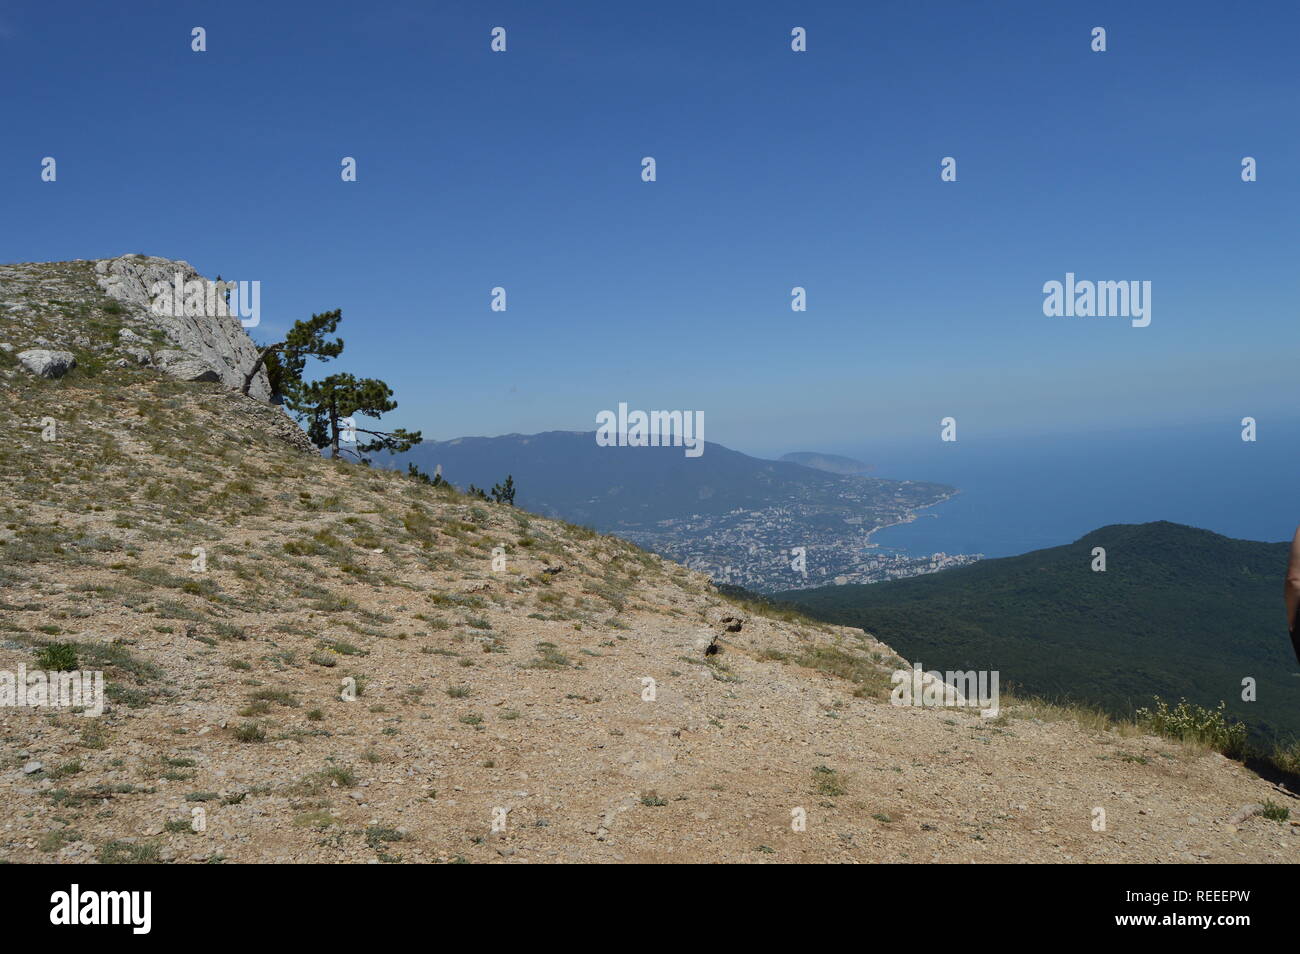 A lonely pine tree with a curving trunk on a mountainside, against a blue sky. Stock Photo